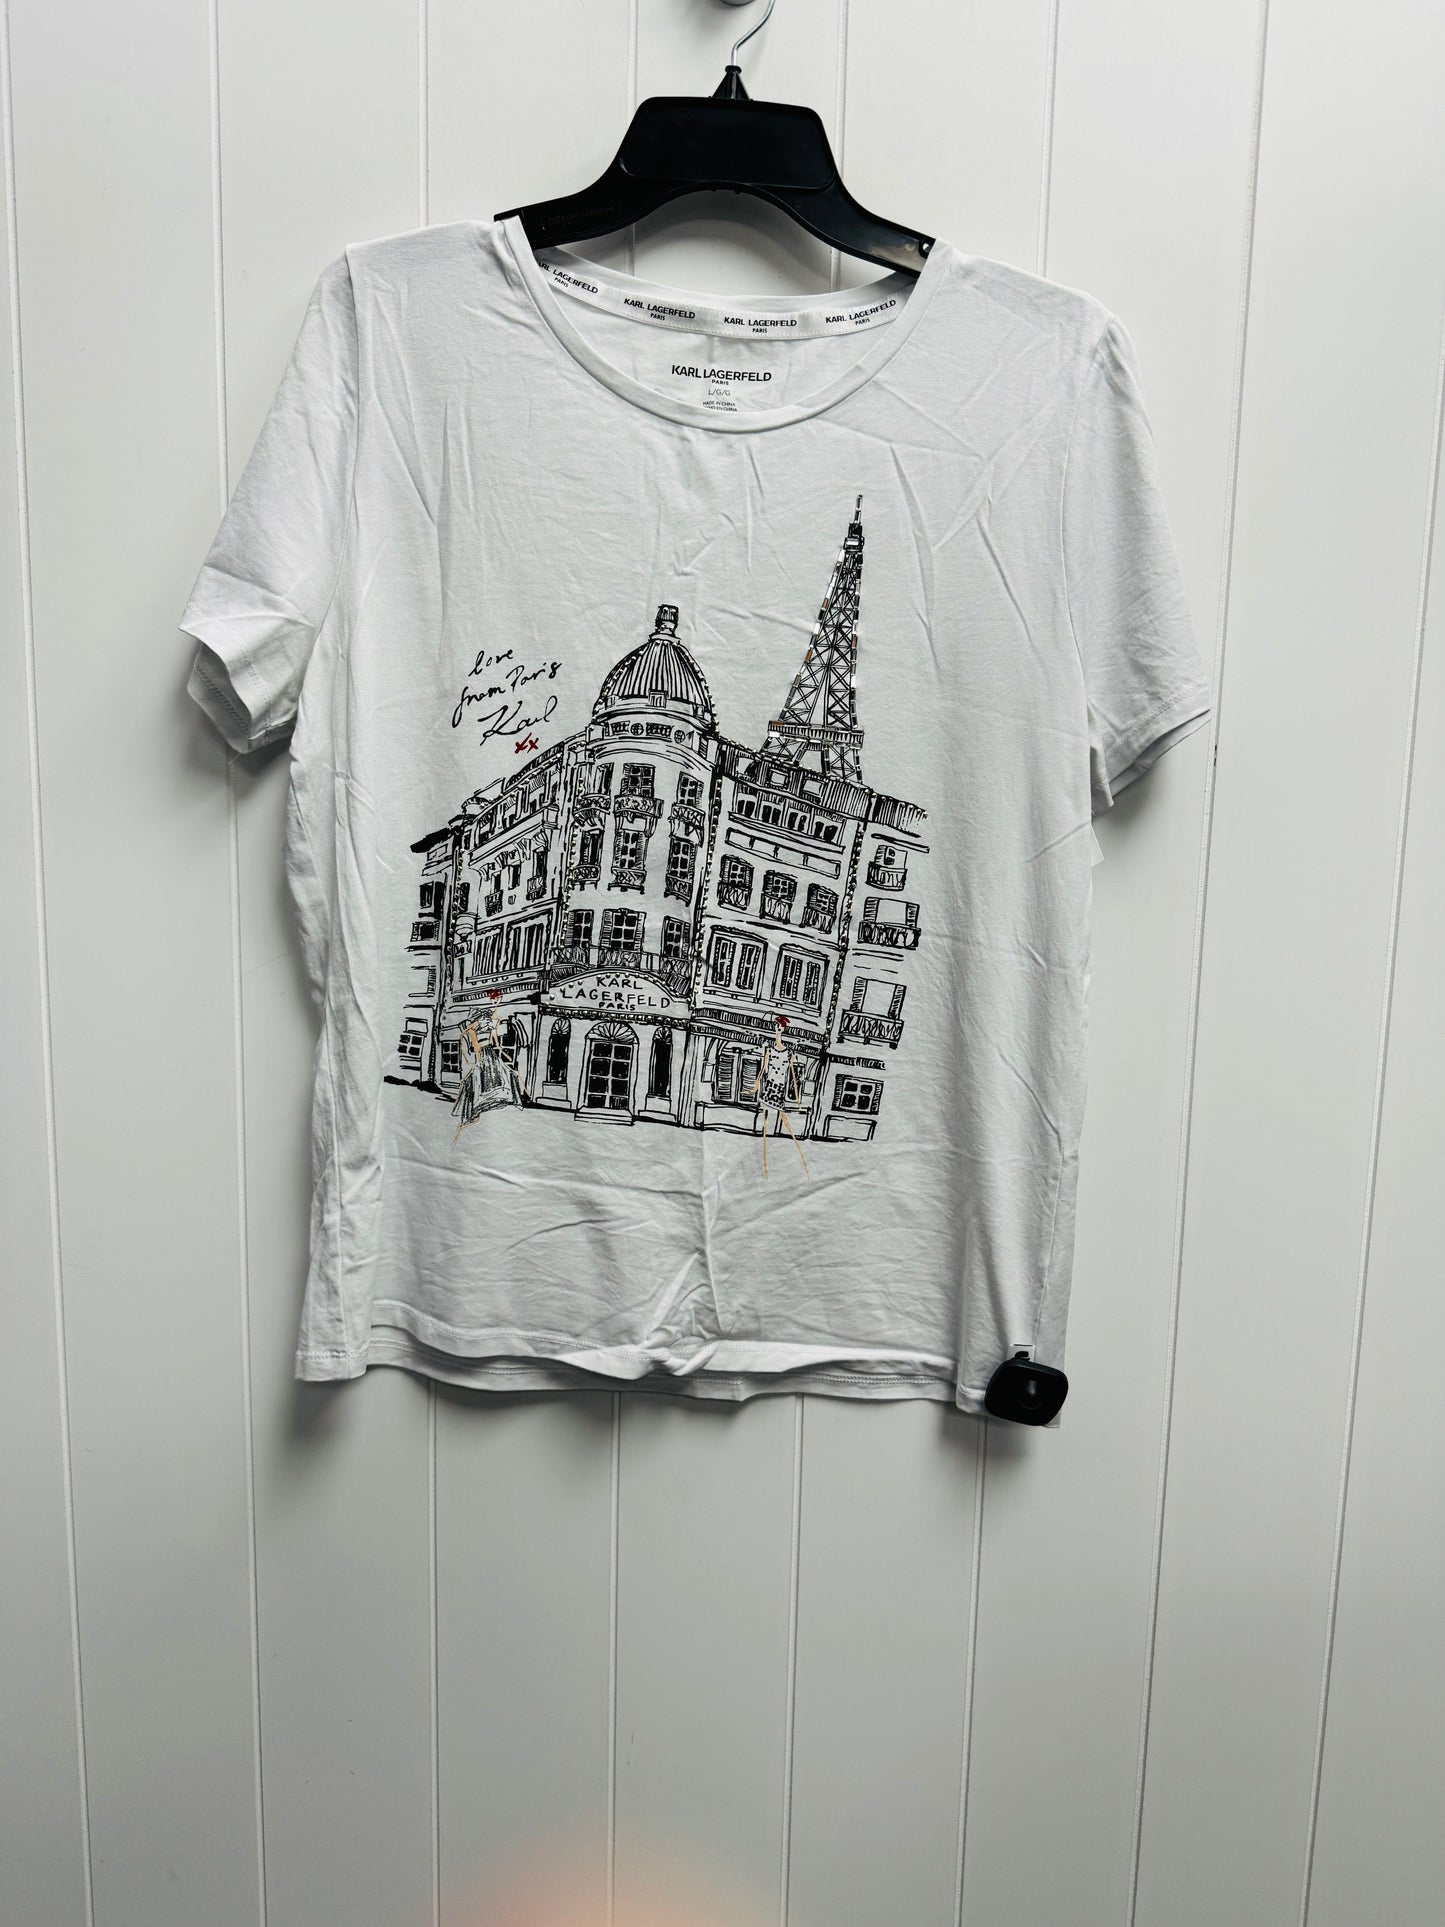 White Top Short Sleeve Karl Lagerfeld, Size L